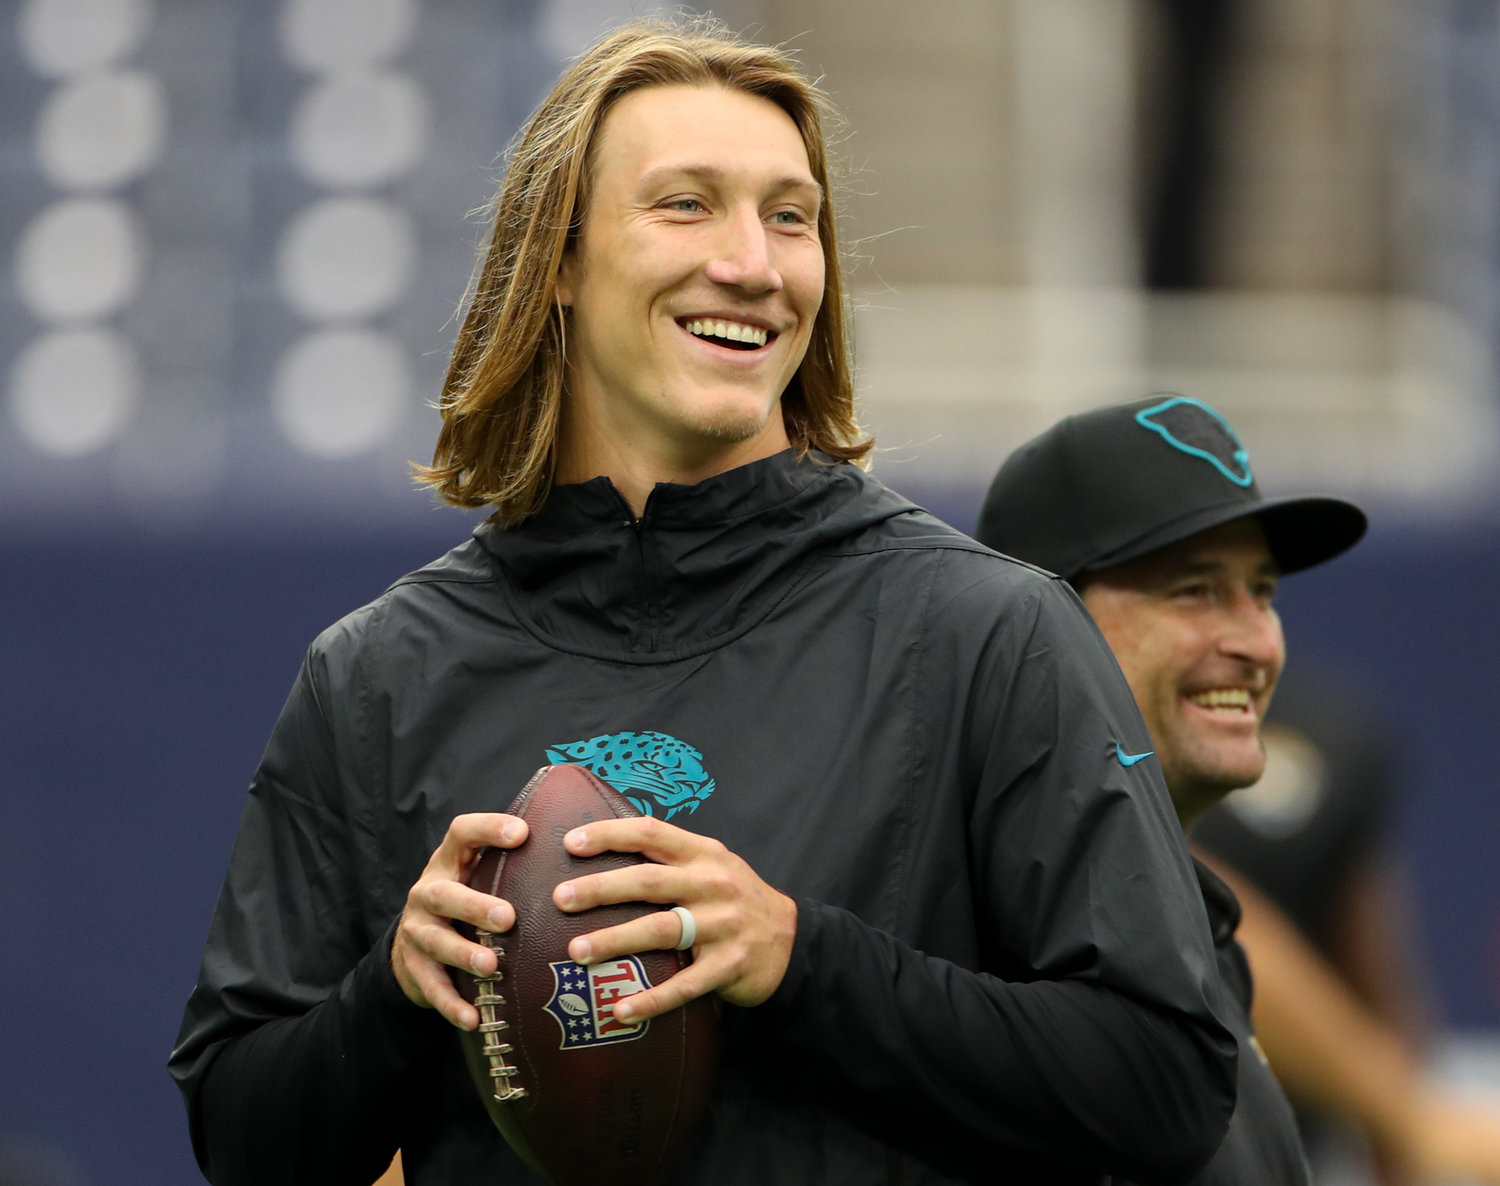 Jacksonville Jaguars quarterback Trevor Lawrence (16) warms up before the start of an NFL game between the Houston Texans and the Jacksonville Jaguars on September 12, 2021 in Houston, Texas.